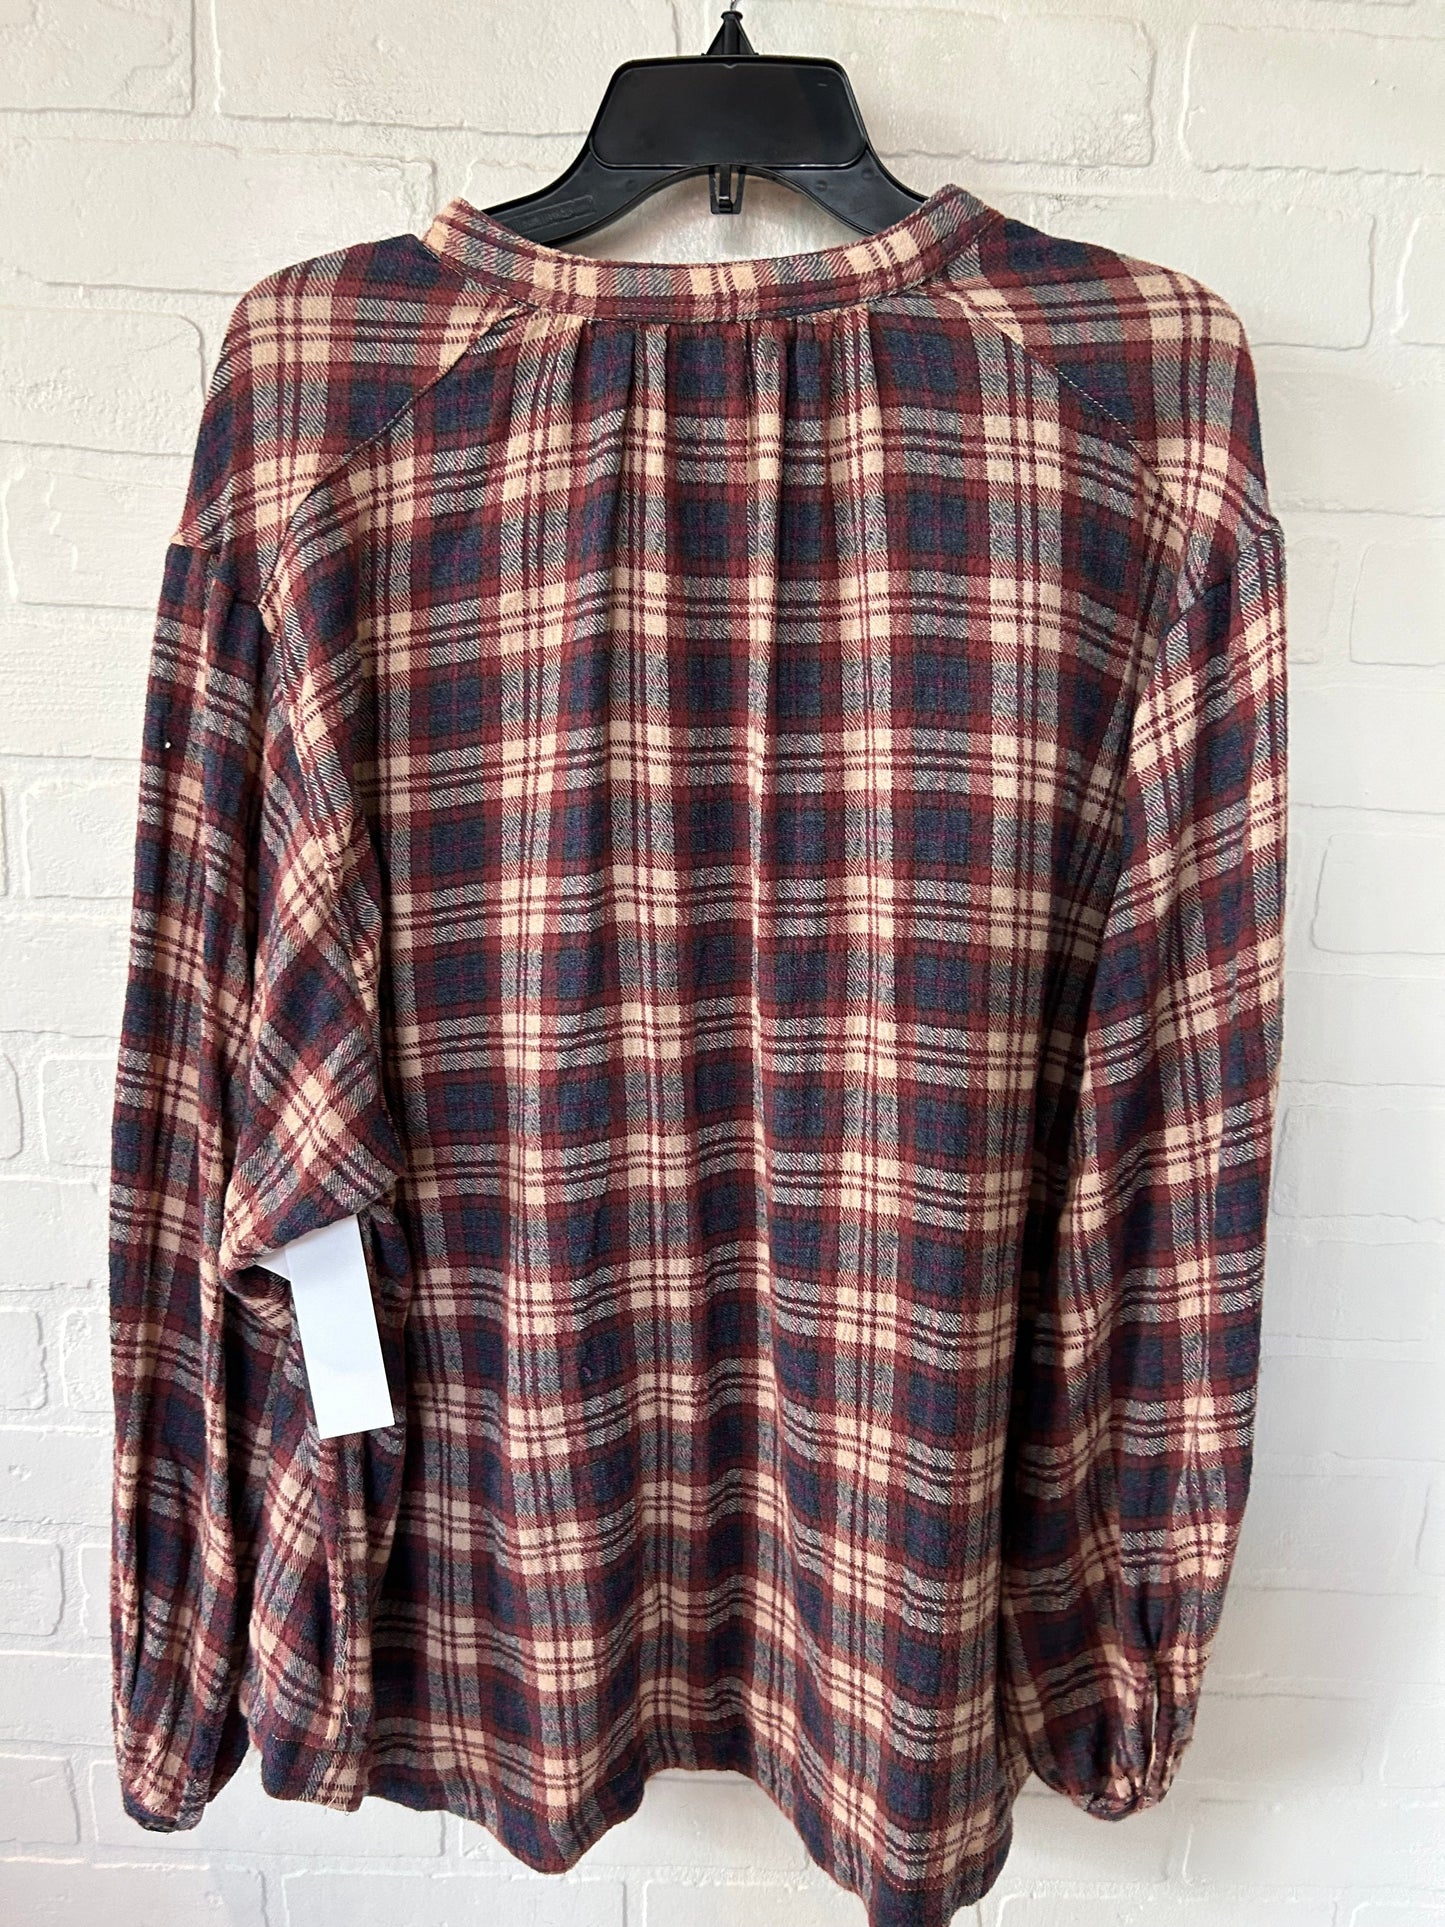 Red & Tan Top Long Sleeve Free People, Size L